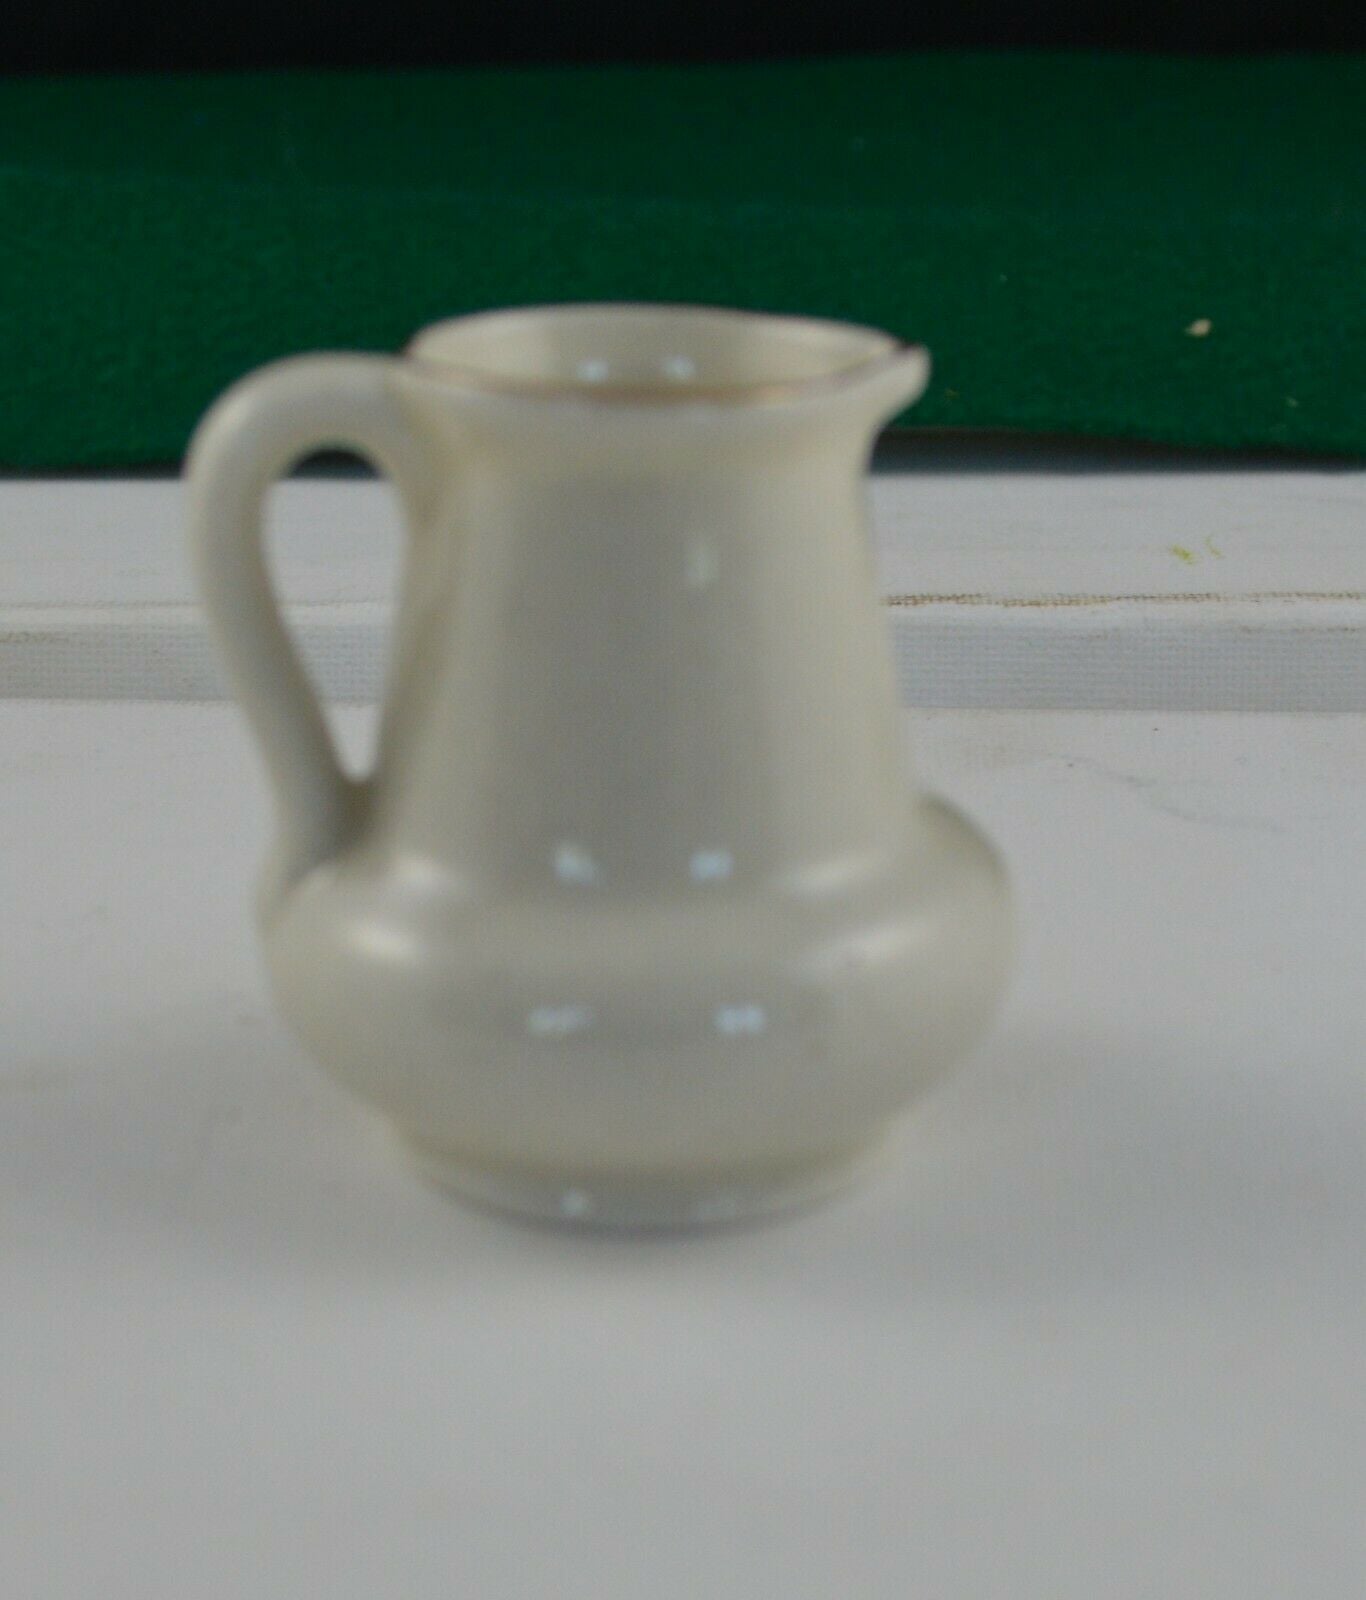 ARCADIAN CRESTED WARE CHINA JUG & GERMAN CRESTED WARE SHAVING MUG BIRMINGHAM(PREVIOUSLY OWNED) GOOD CONDITION - TMD167207